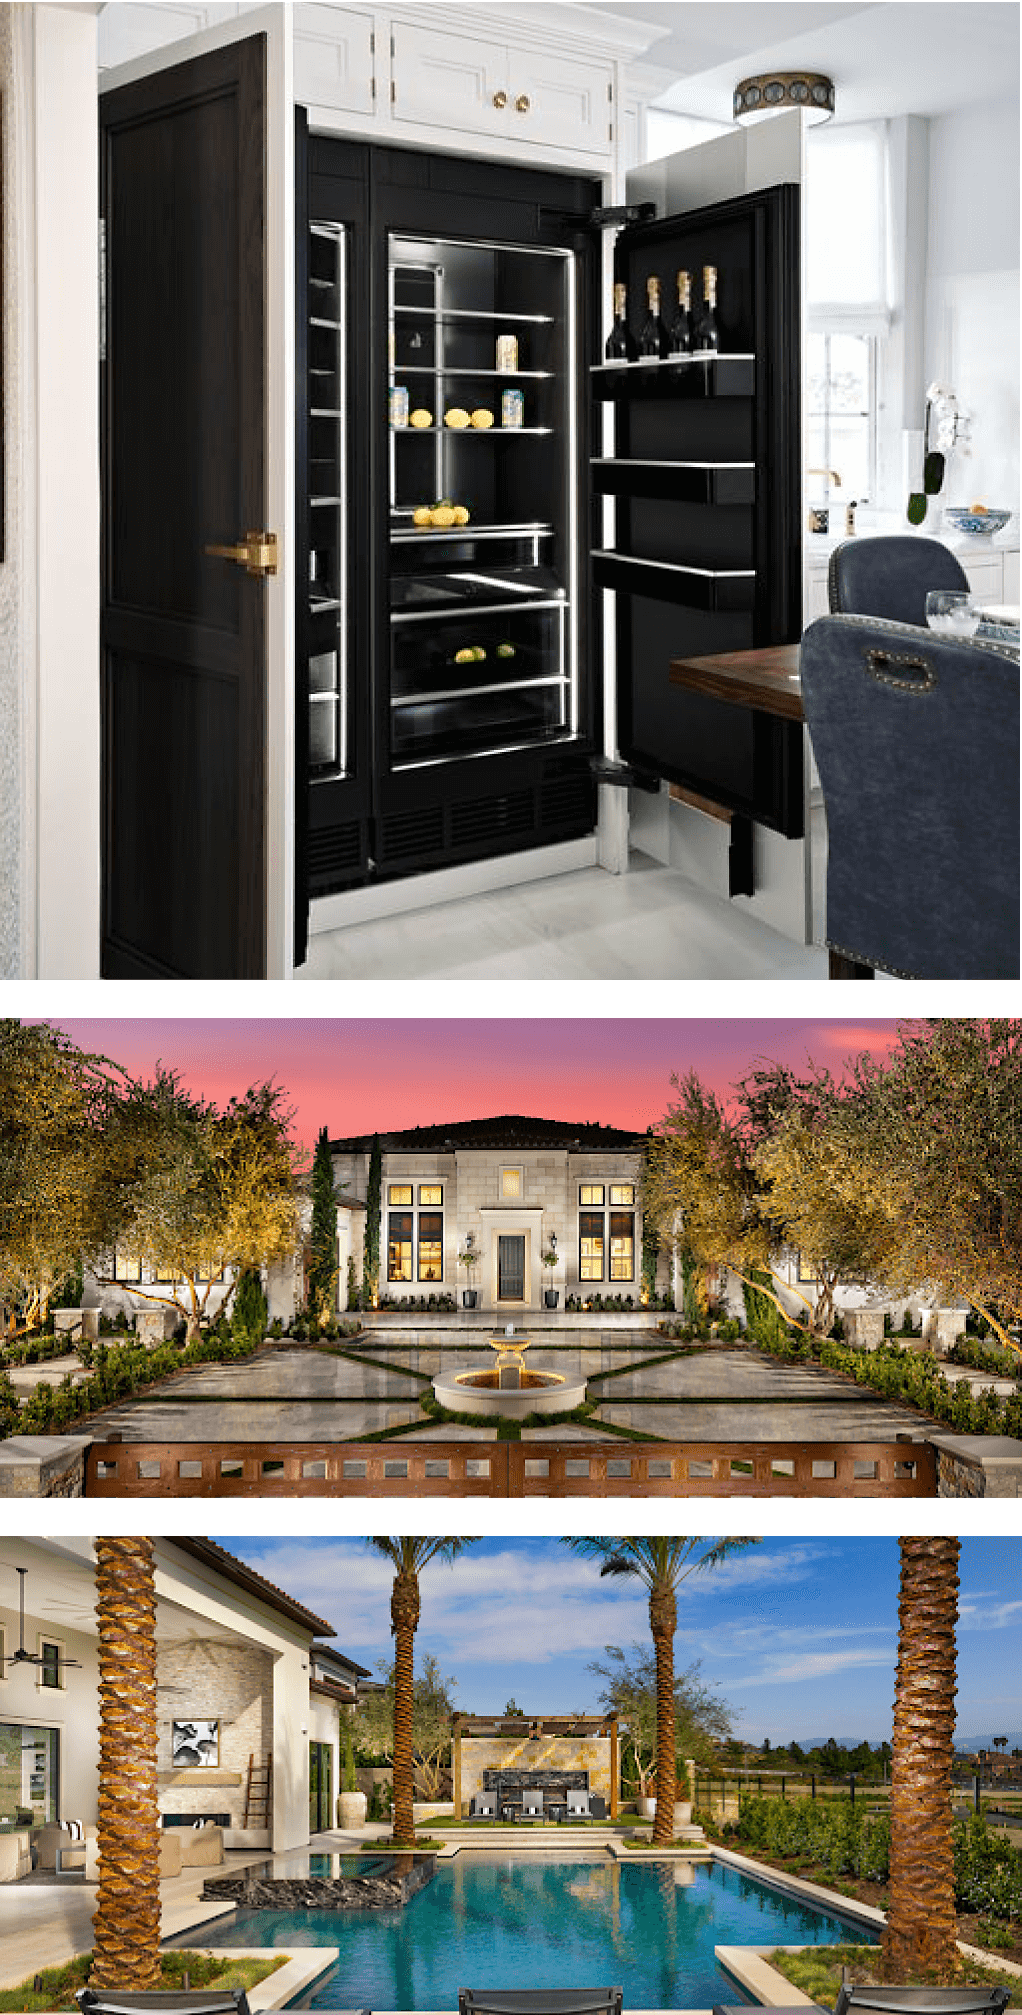 Photo of column refrigerators in a white kitchen, Photo of the residence's courtyard, Photo of a swimming pool at the community